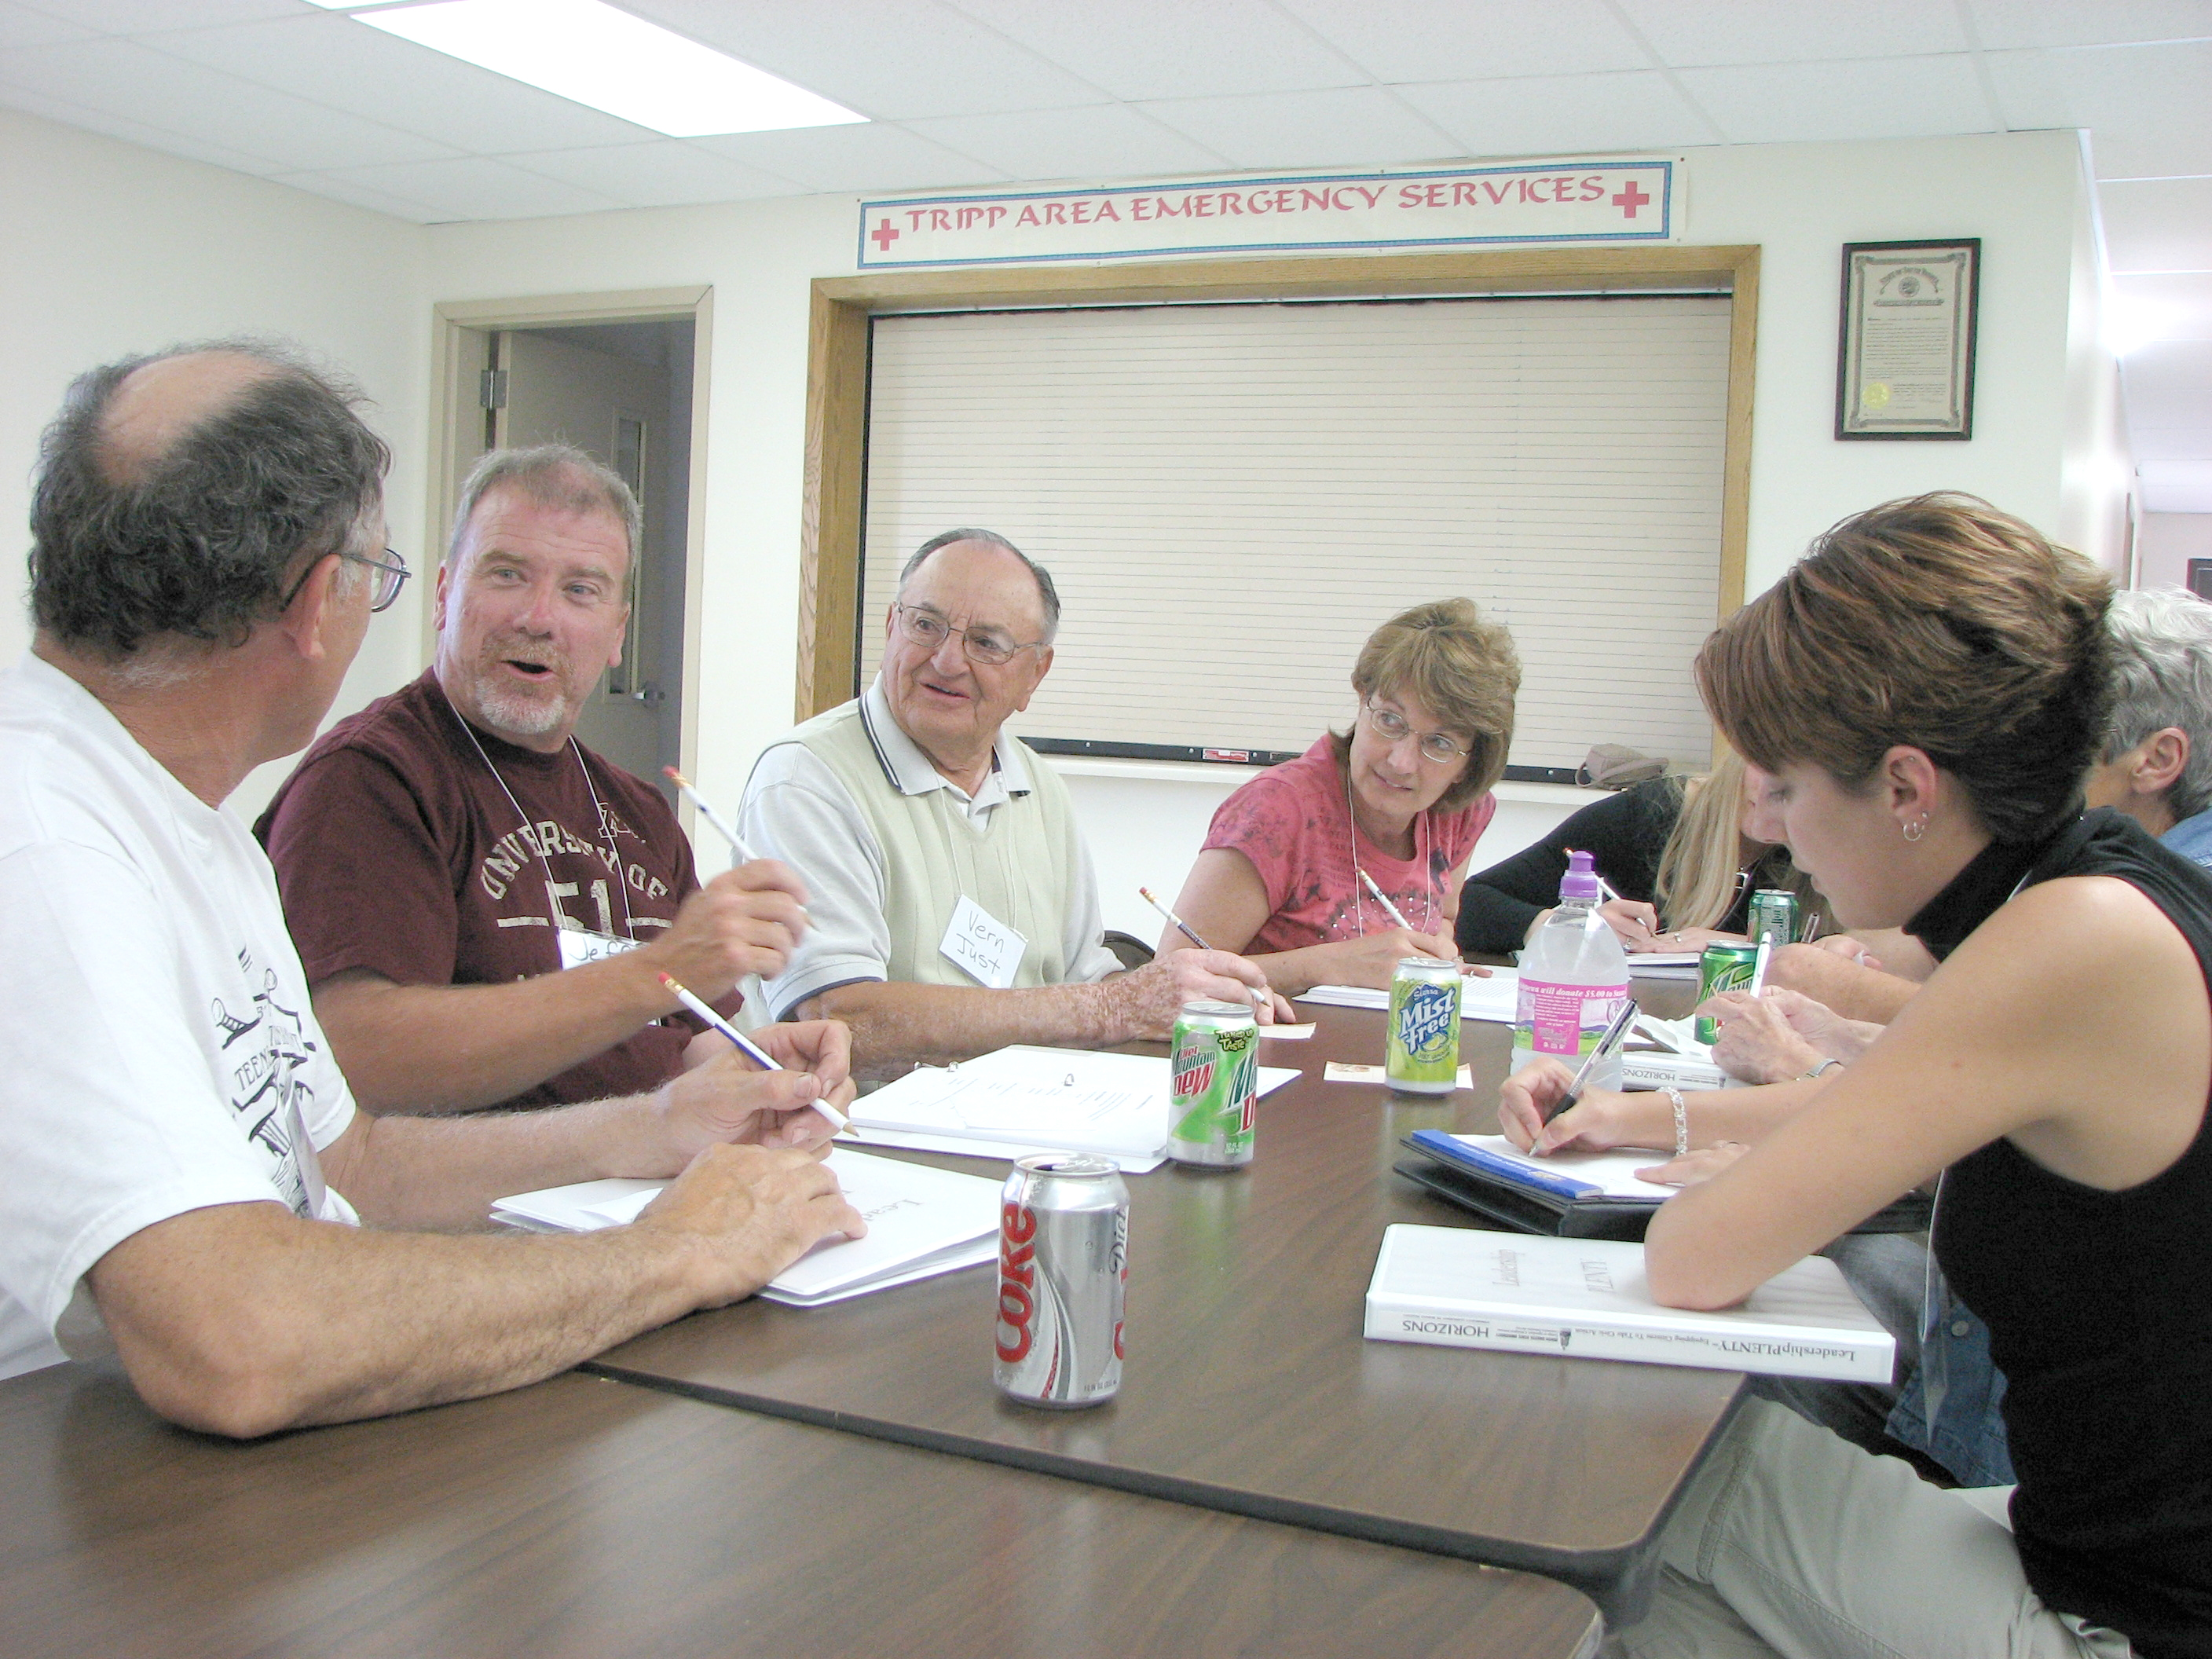 About six people sit around a table in a community room with notebooks and pens